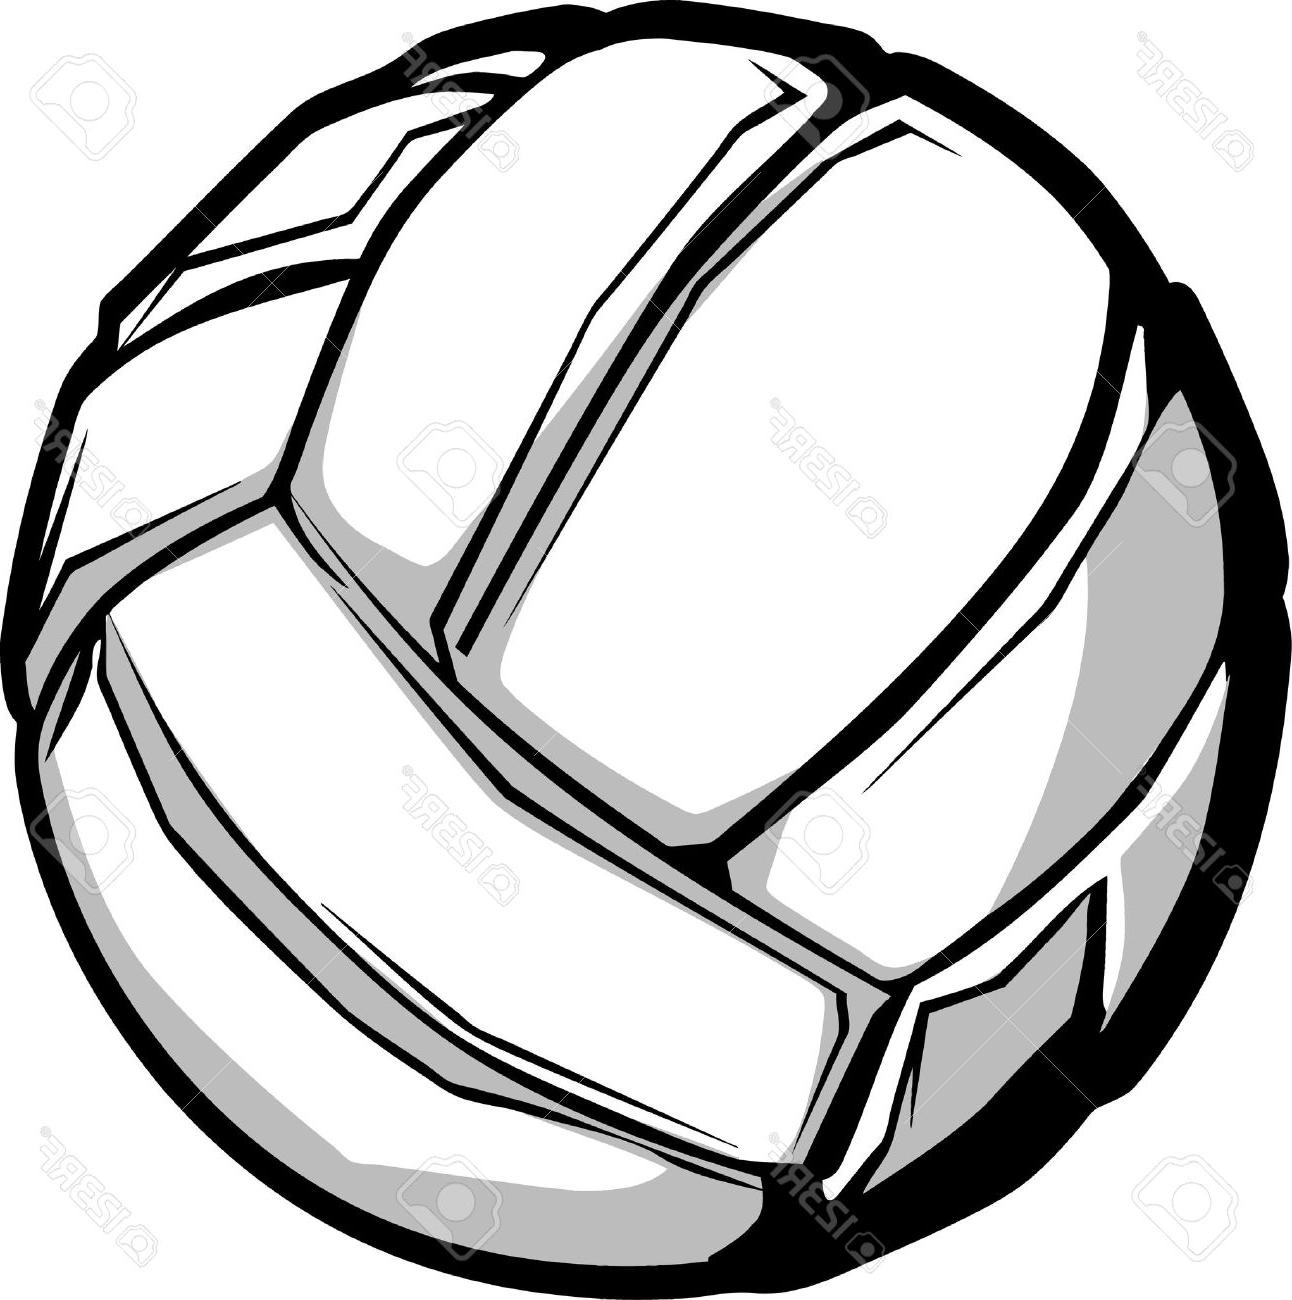 Download Clipart vector free volleyball pictures on Cliparts Pub 2020! 🔝